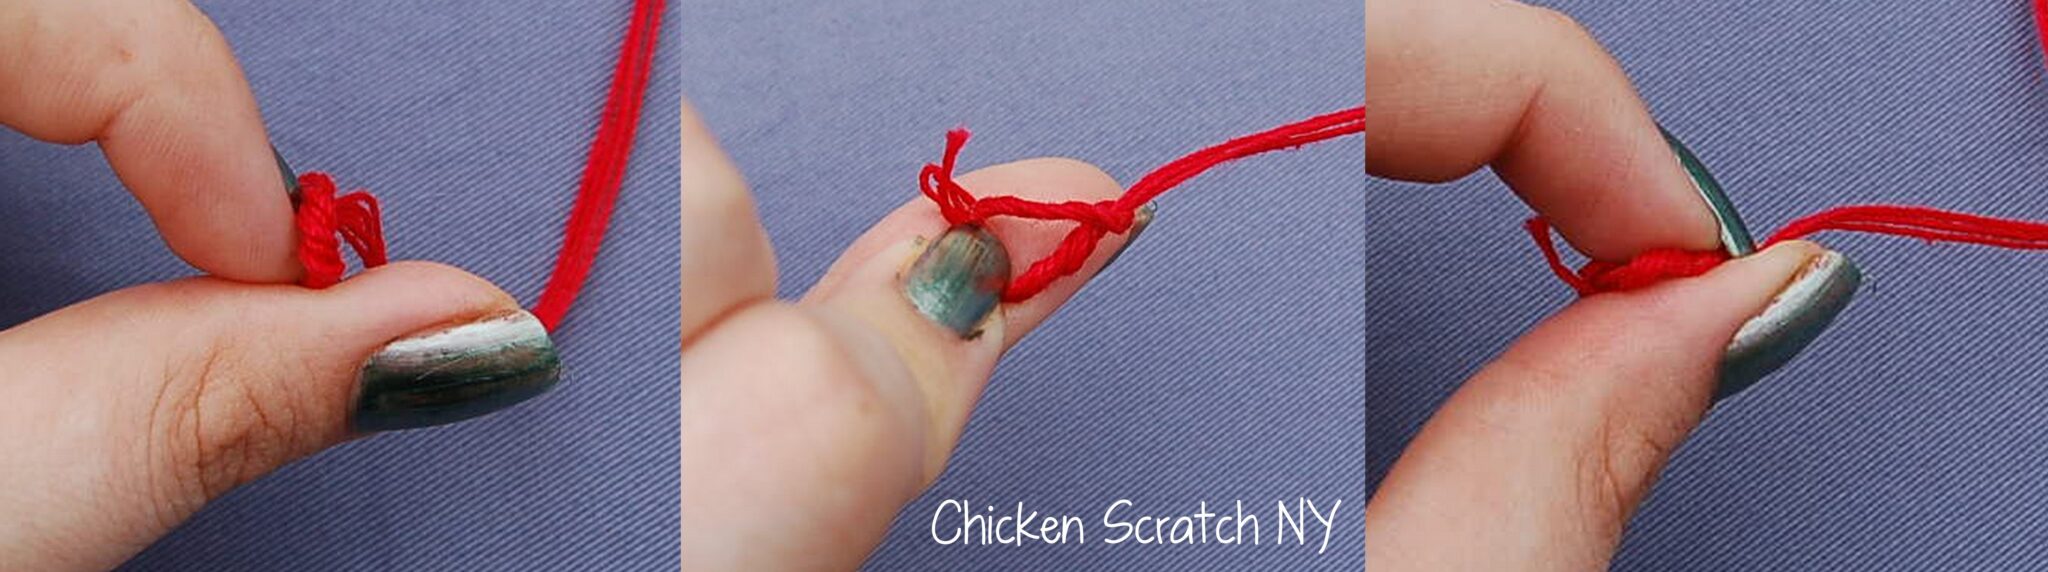 How to Thread a Needle - Easiest Way to Thread & Knot!